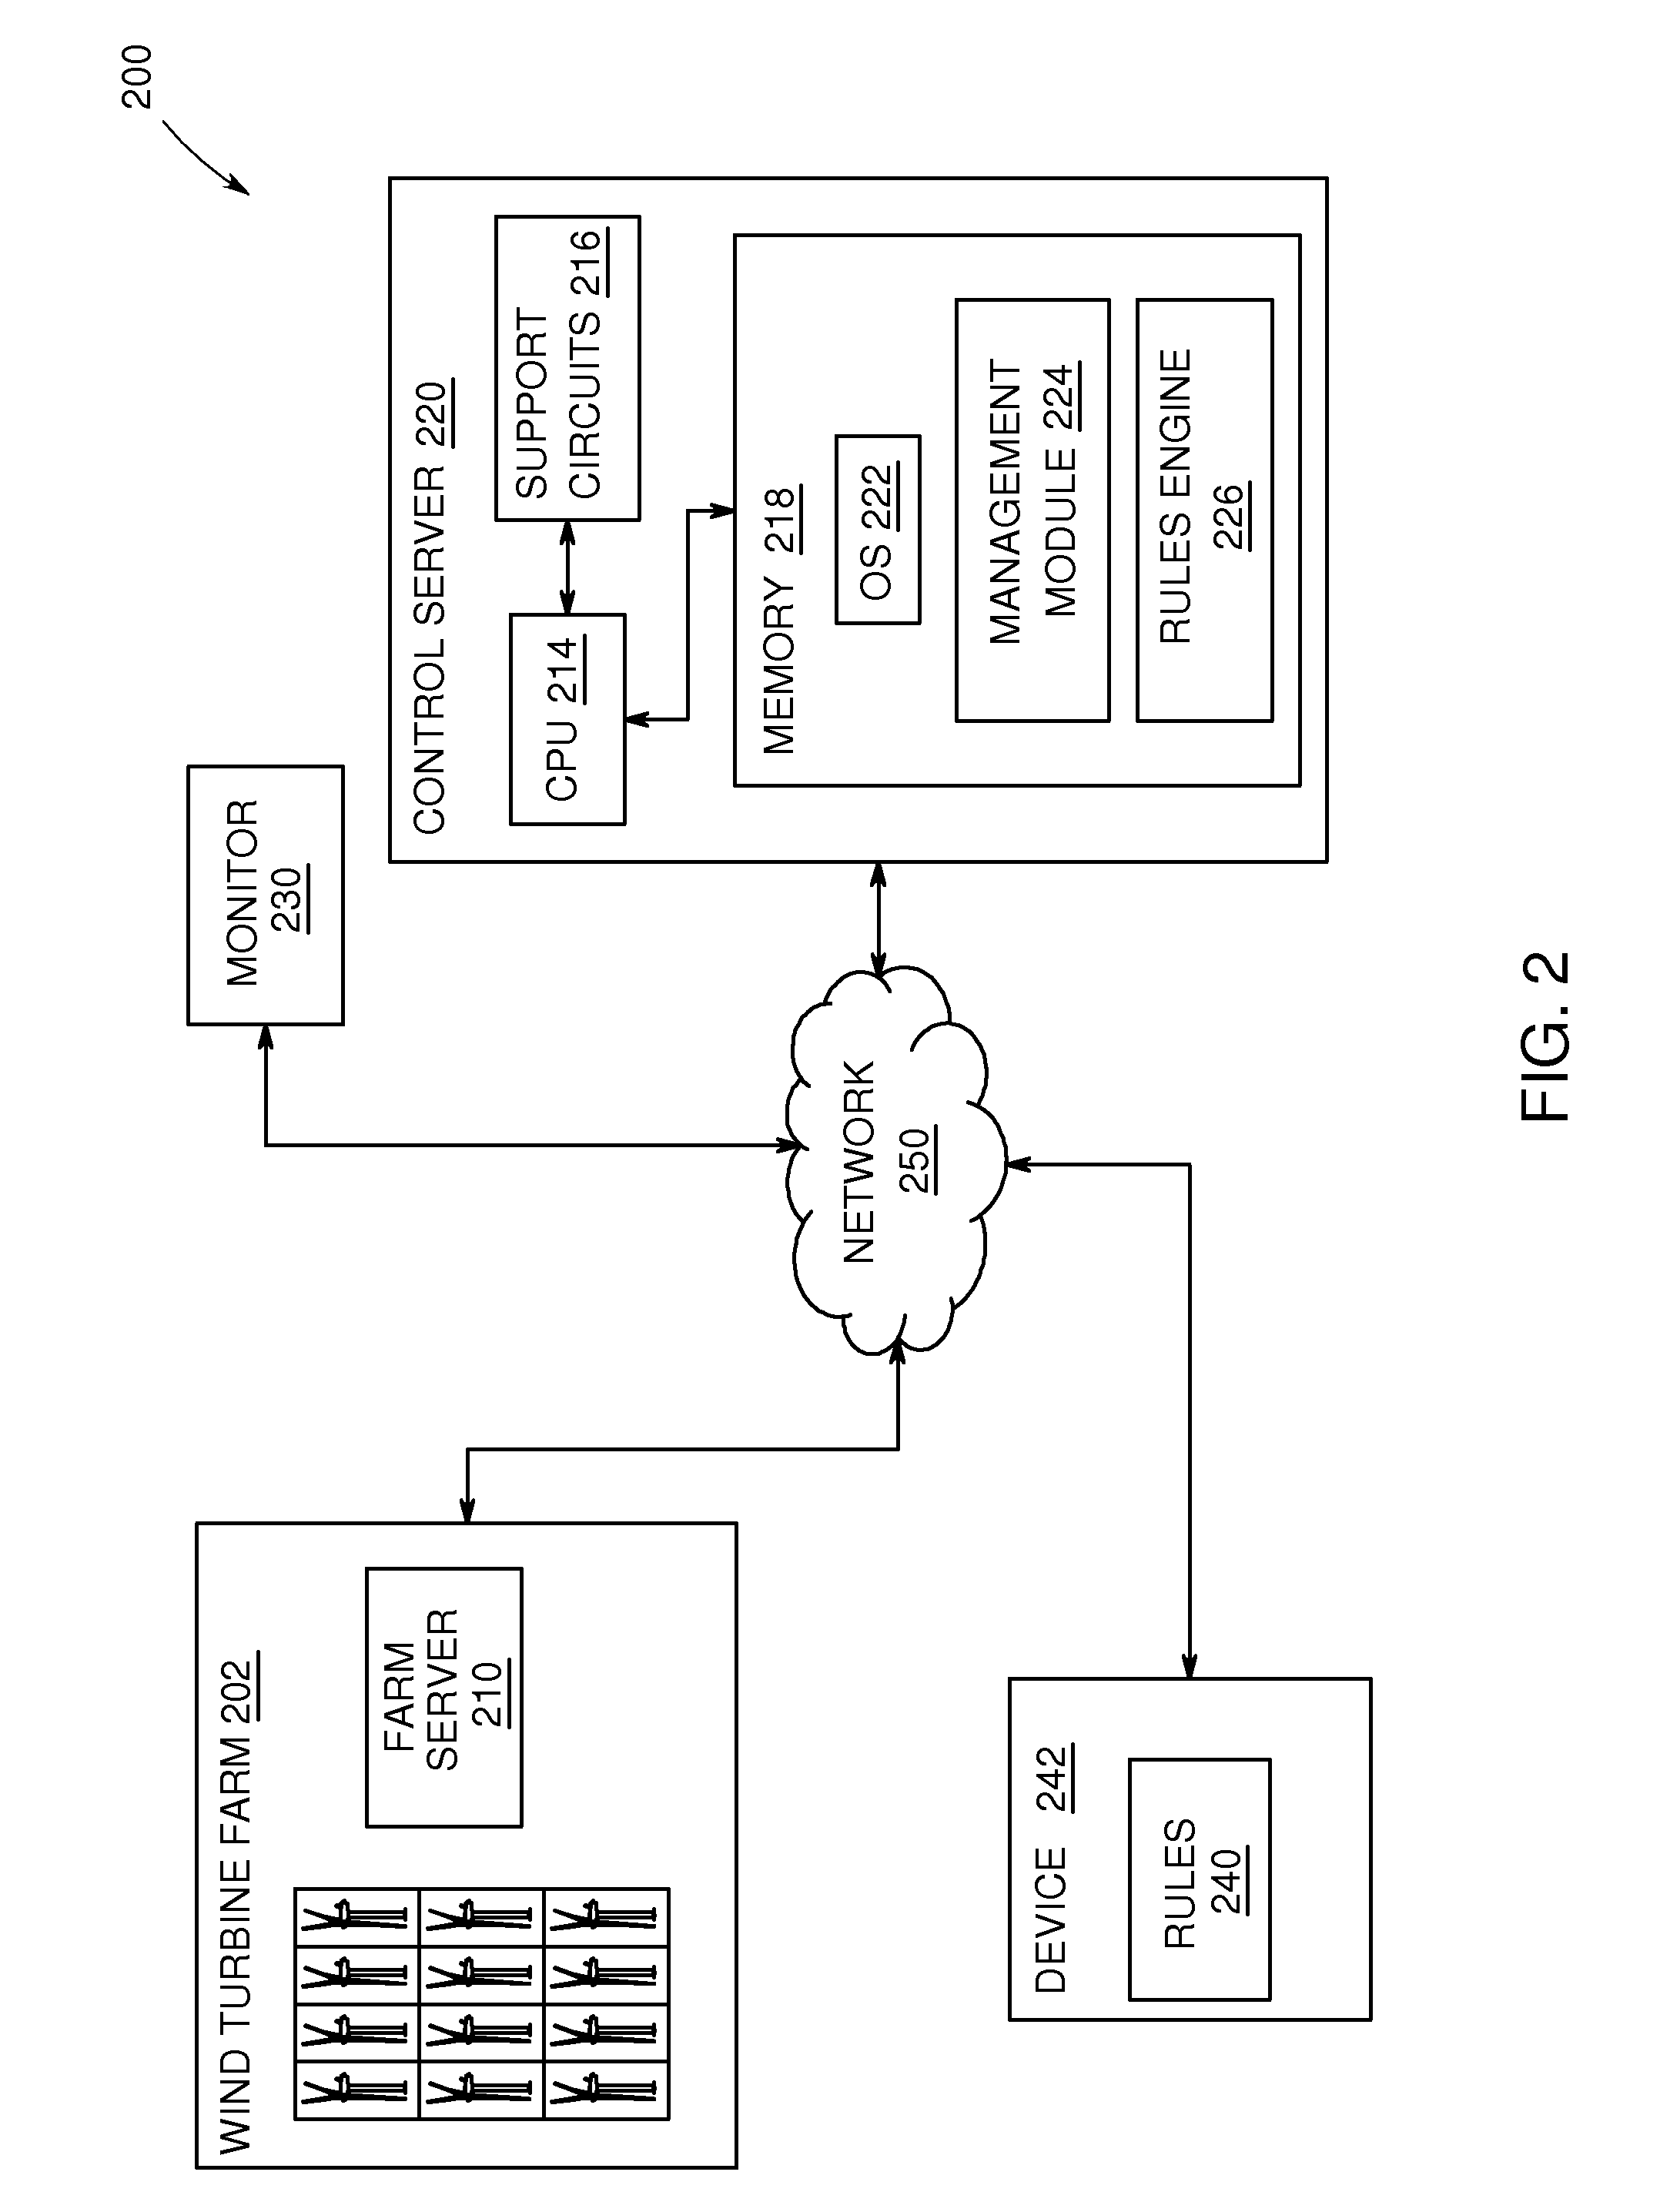 System and method for managing wind turbines and enhanced diagnostics